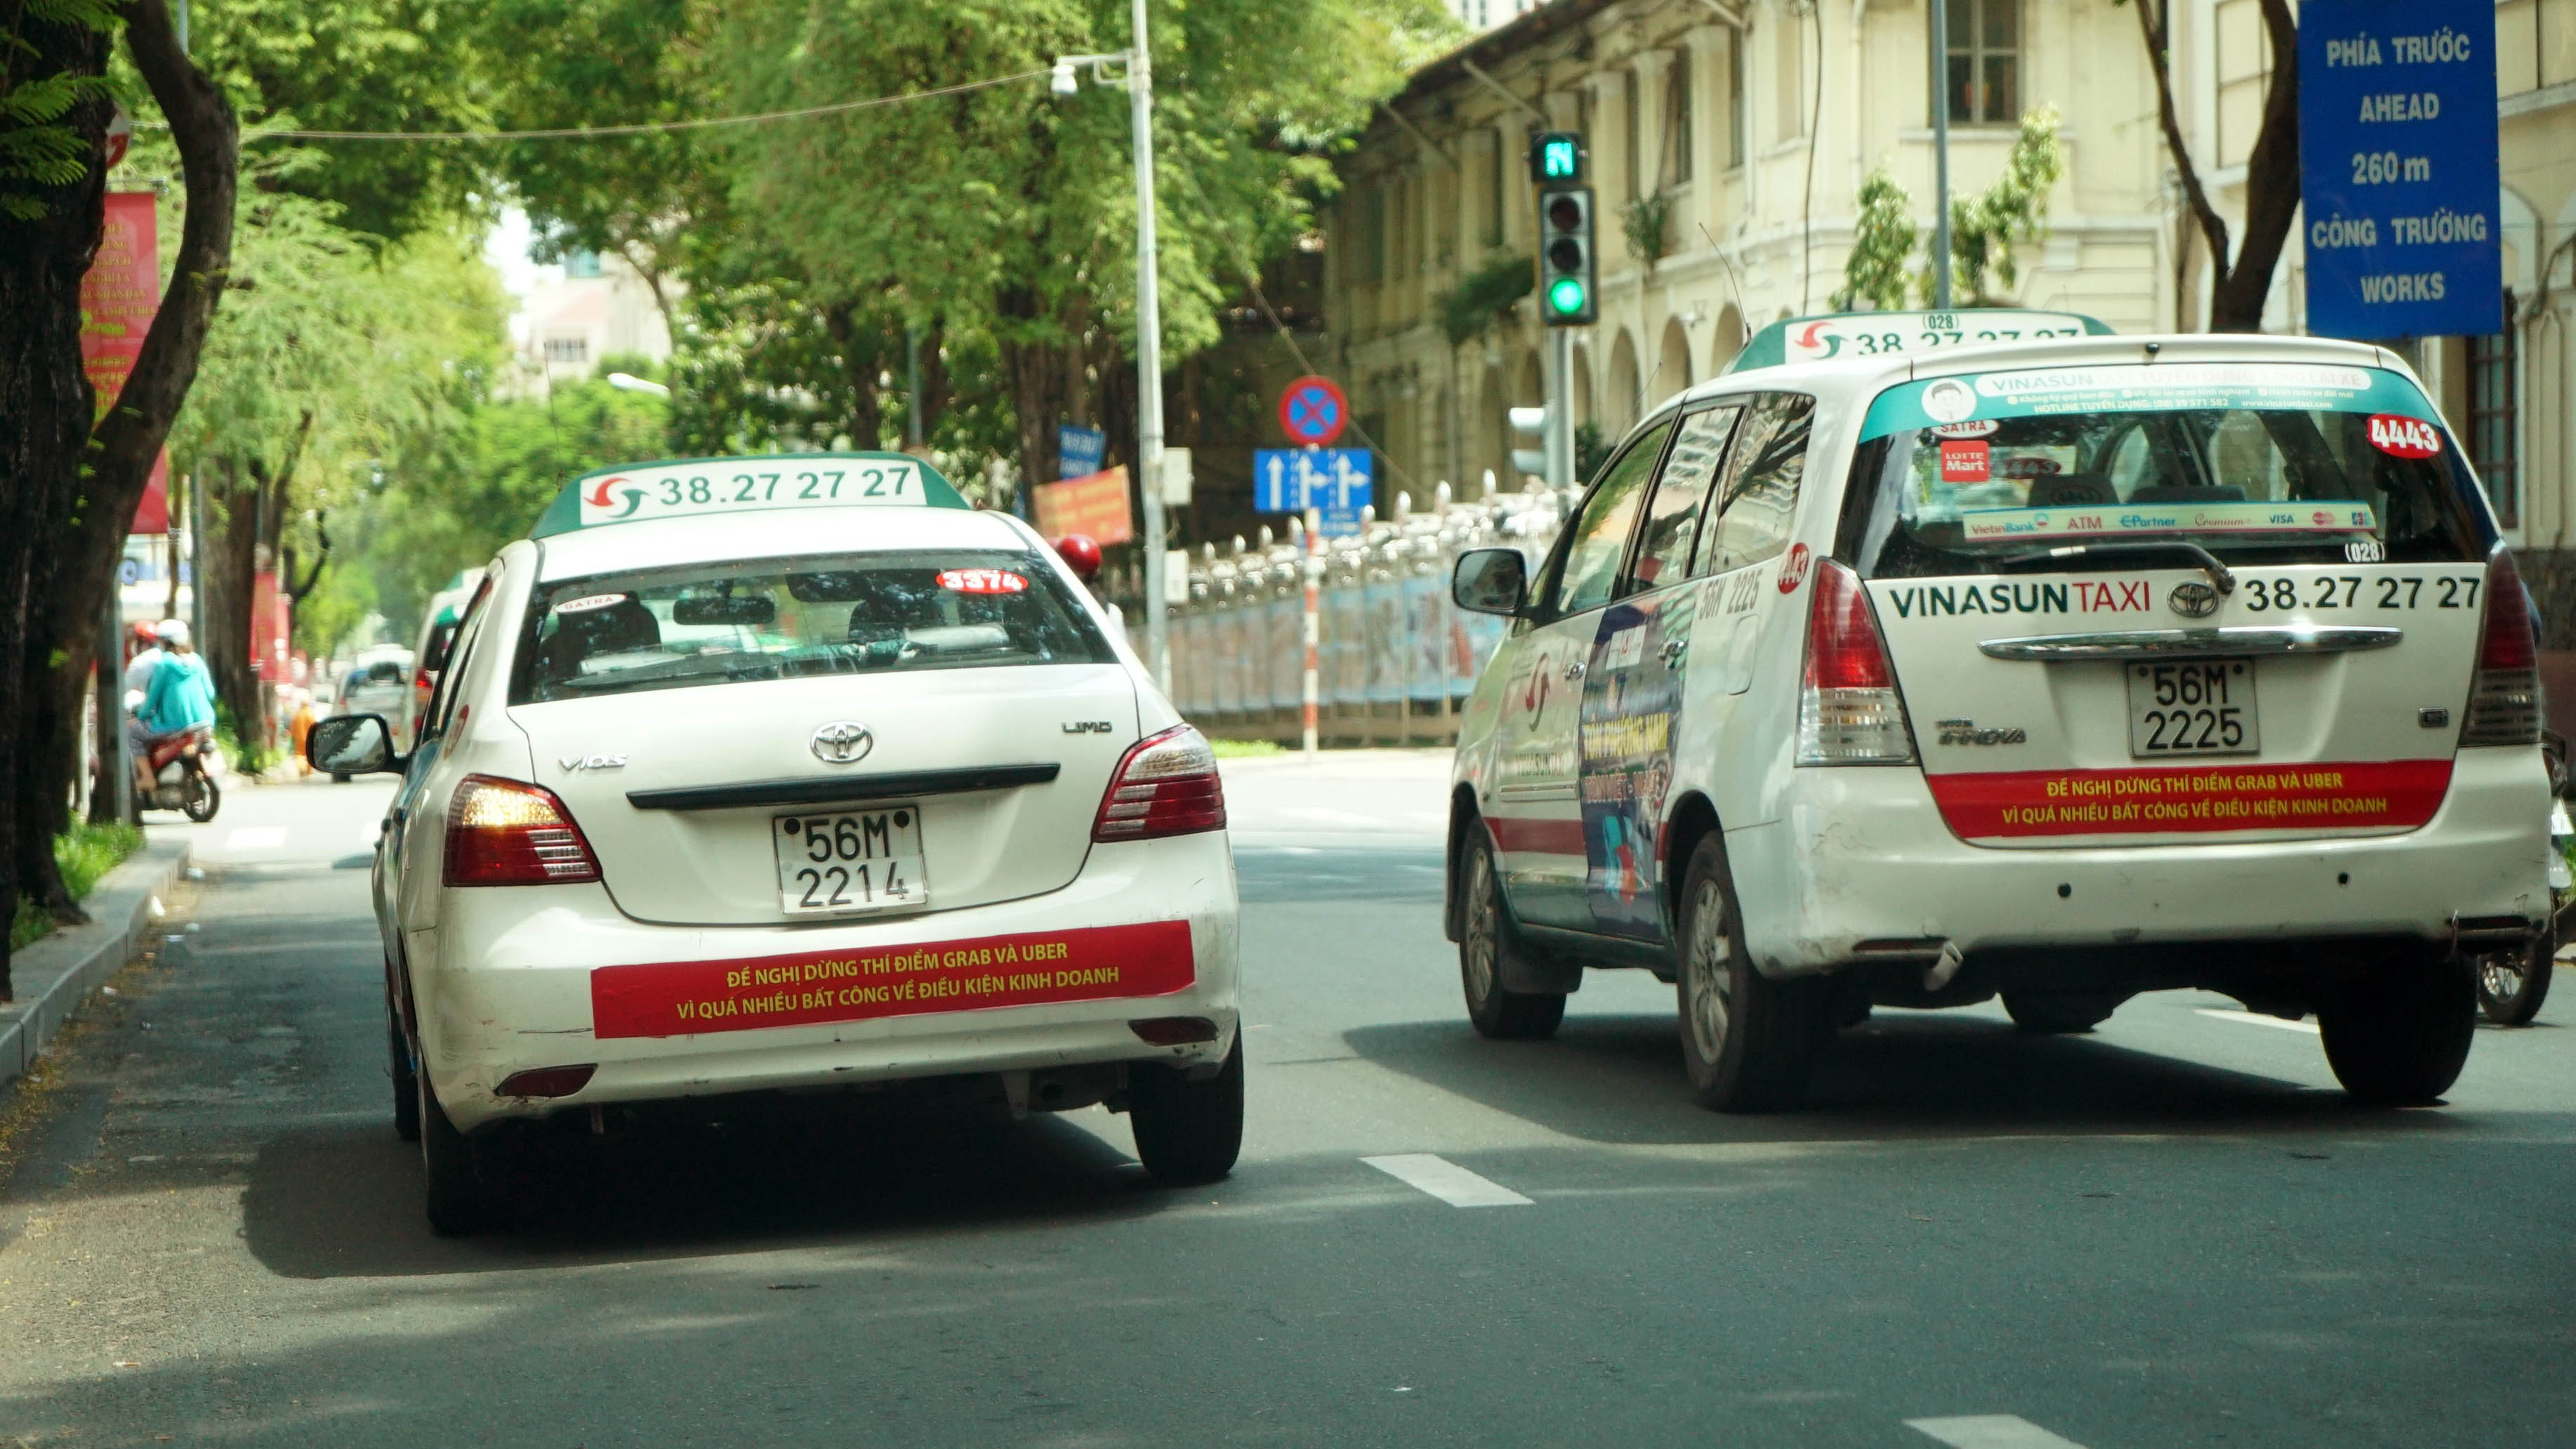 Two Vinasun taxis with anti-Uber and Grab bumper stickers in Ho Chi Minh City. Photo: Tuoi Tre